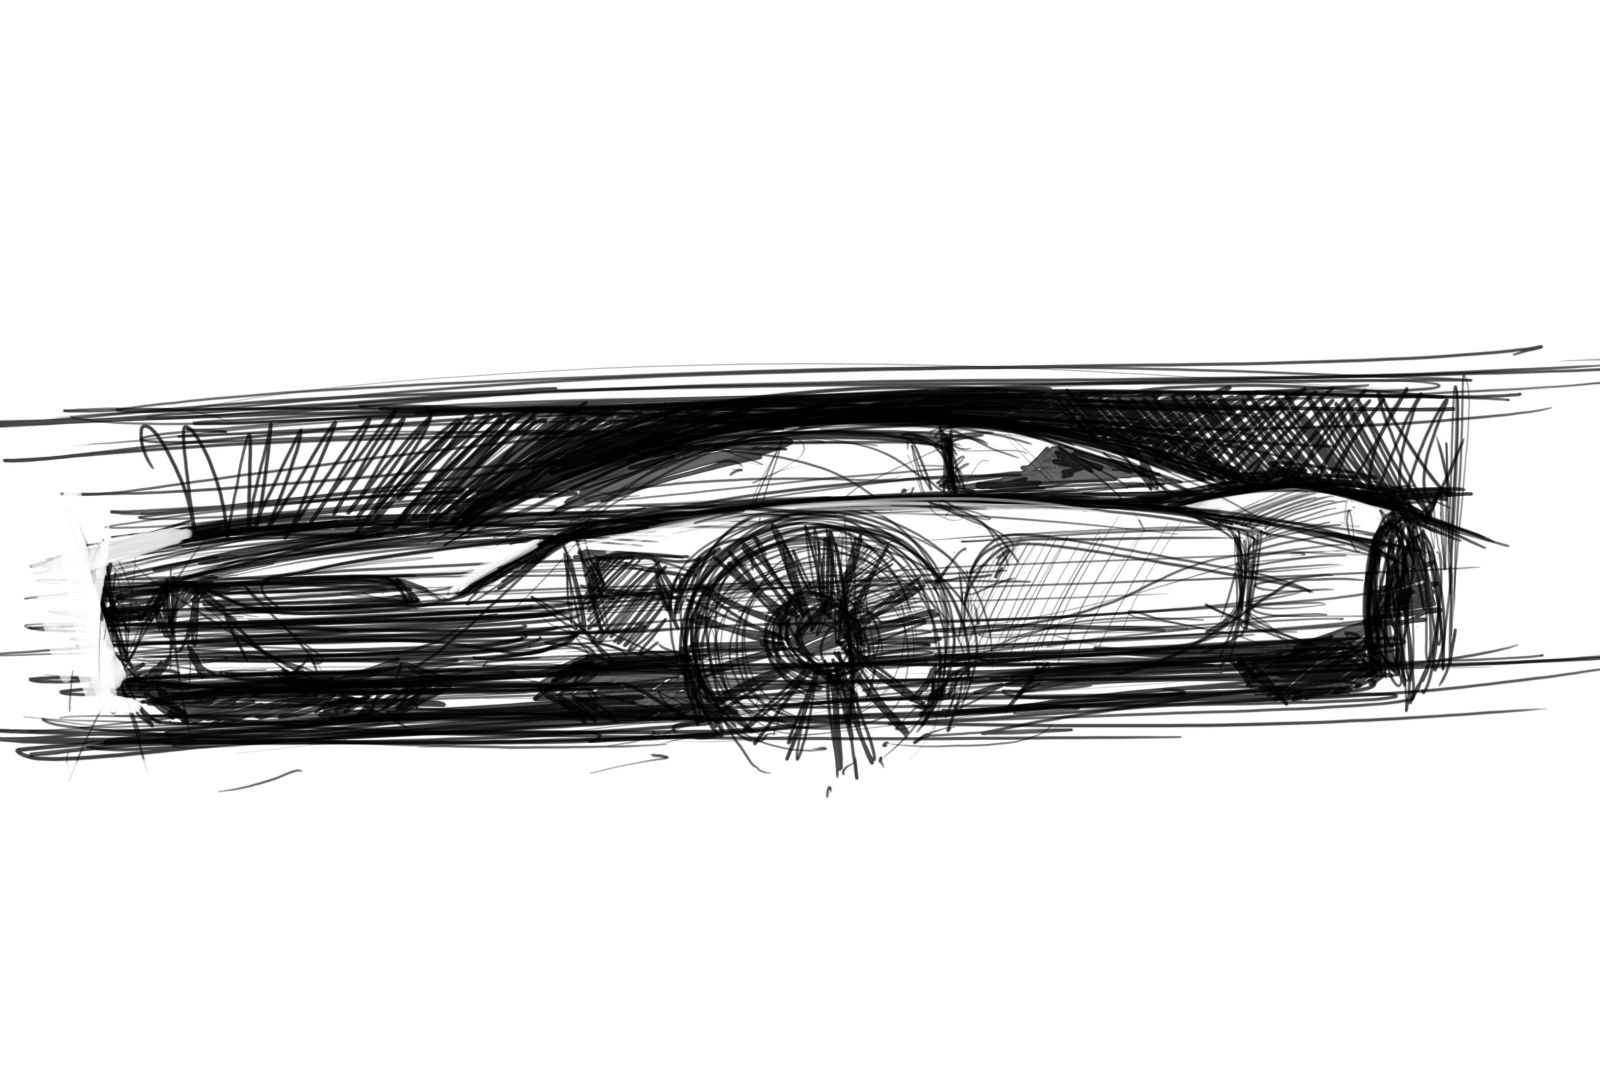 Illustration for article titled Todays been 13 days in one, so heres a sketch of a Lincoln on a GT